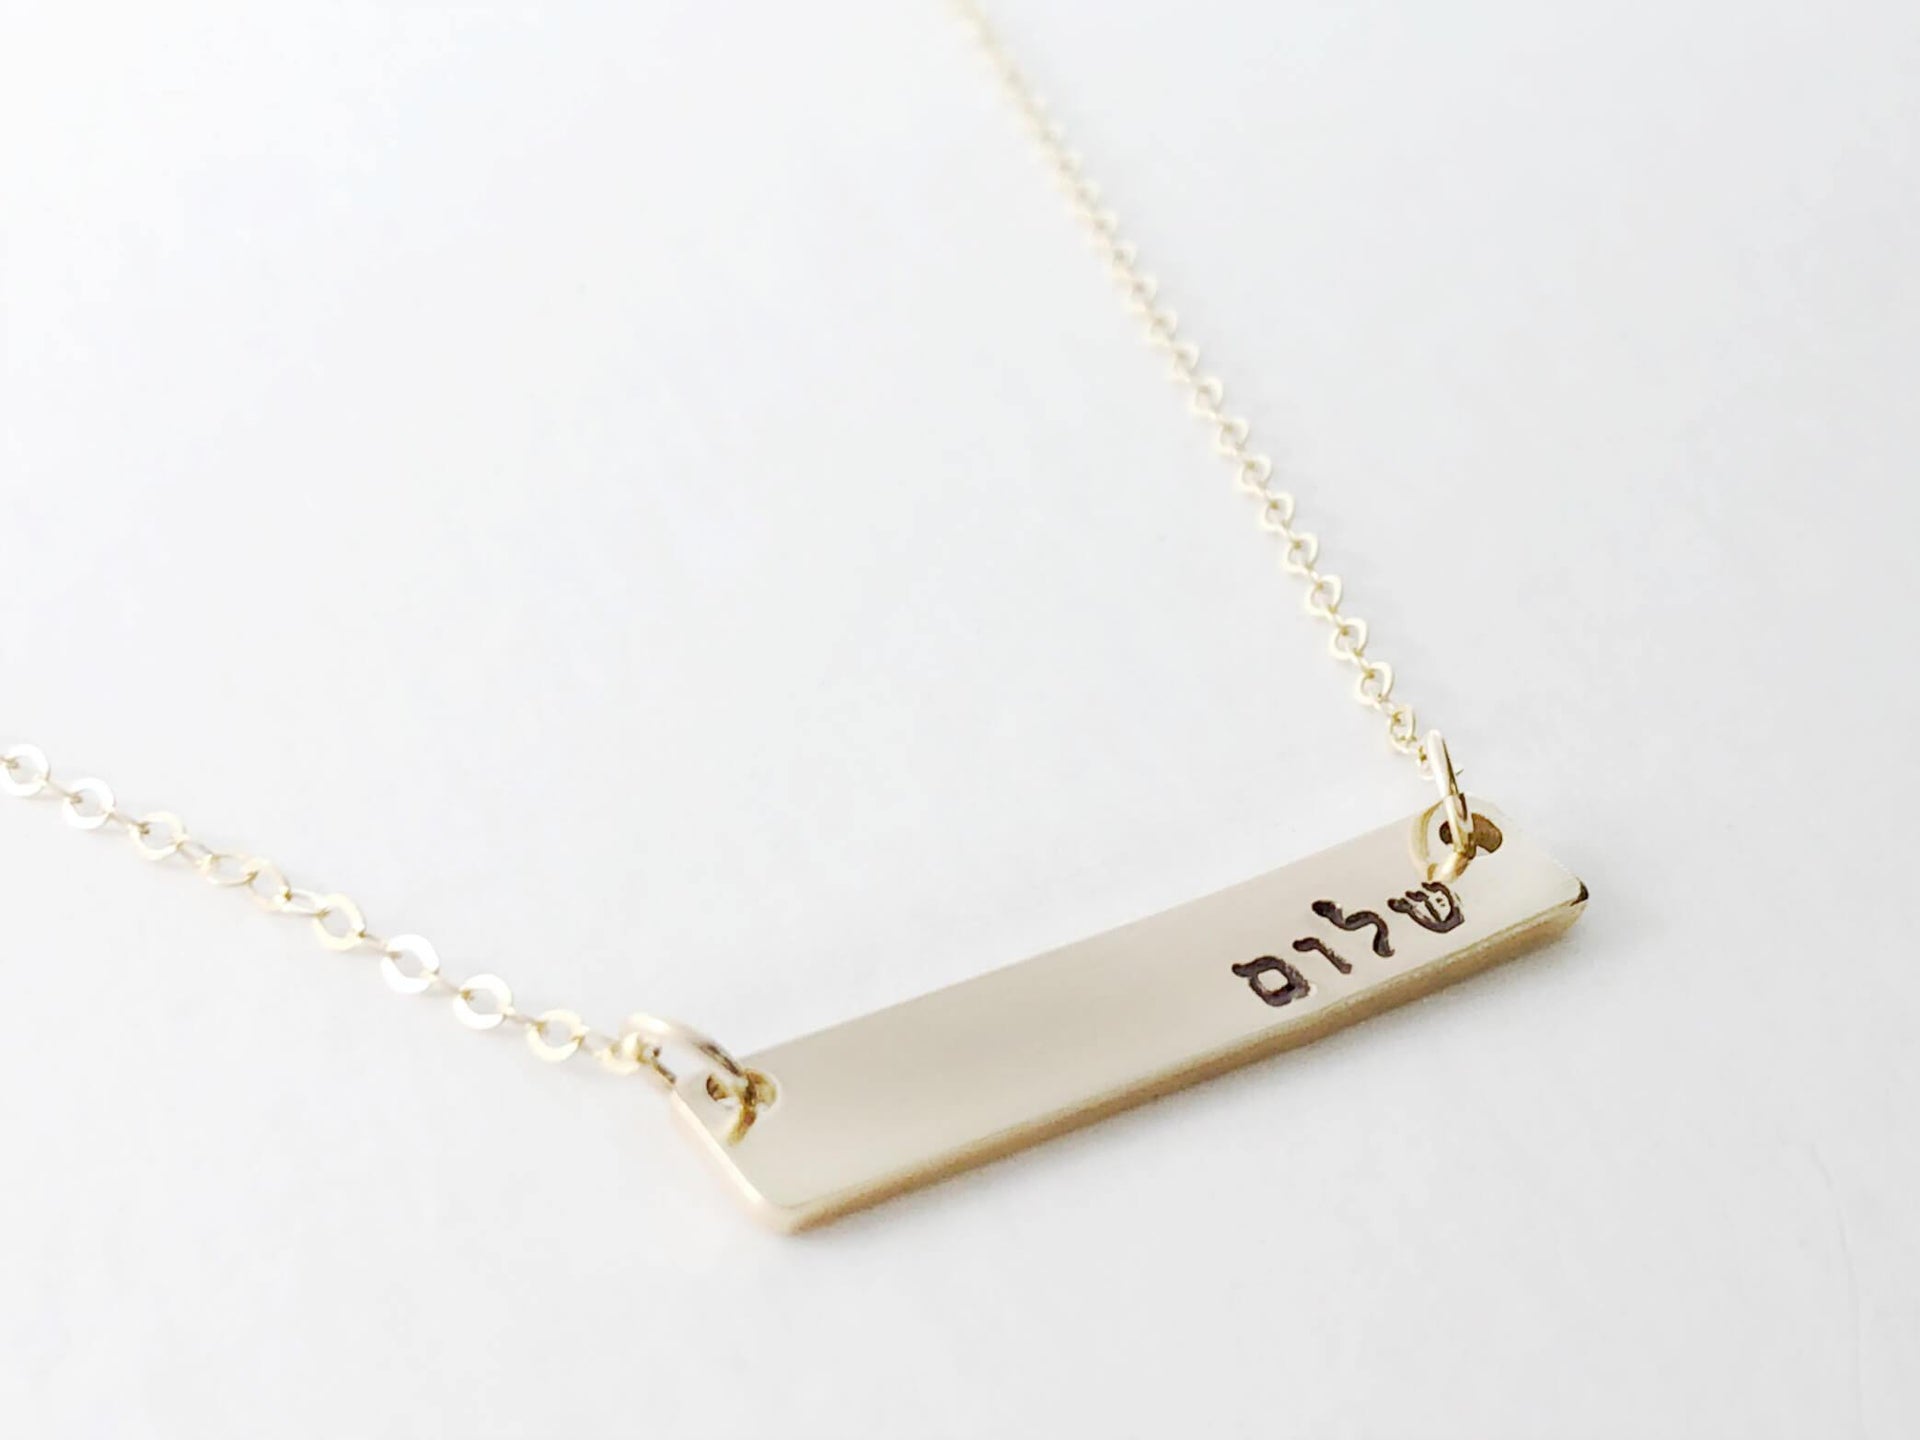 Everything Beautiful Necklaces Shalom Horizontal Bar Necklace - Gold, Rose Gold or Sterling Silver